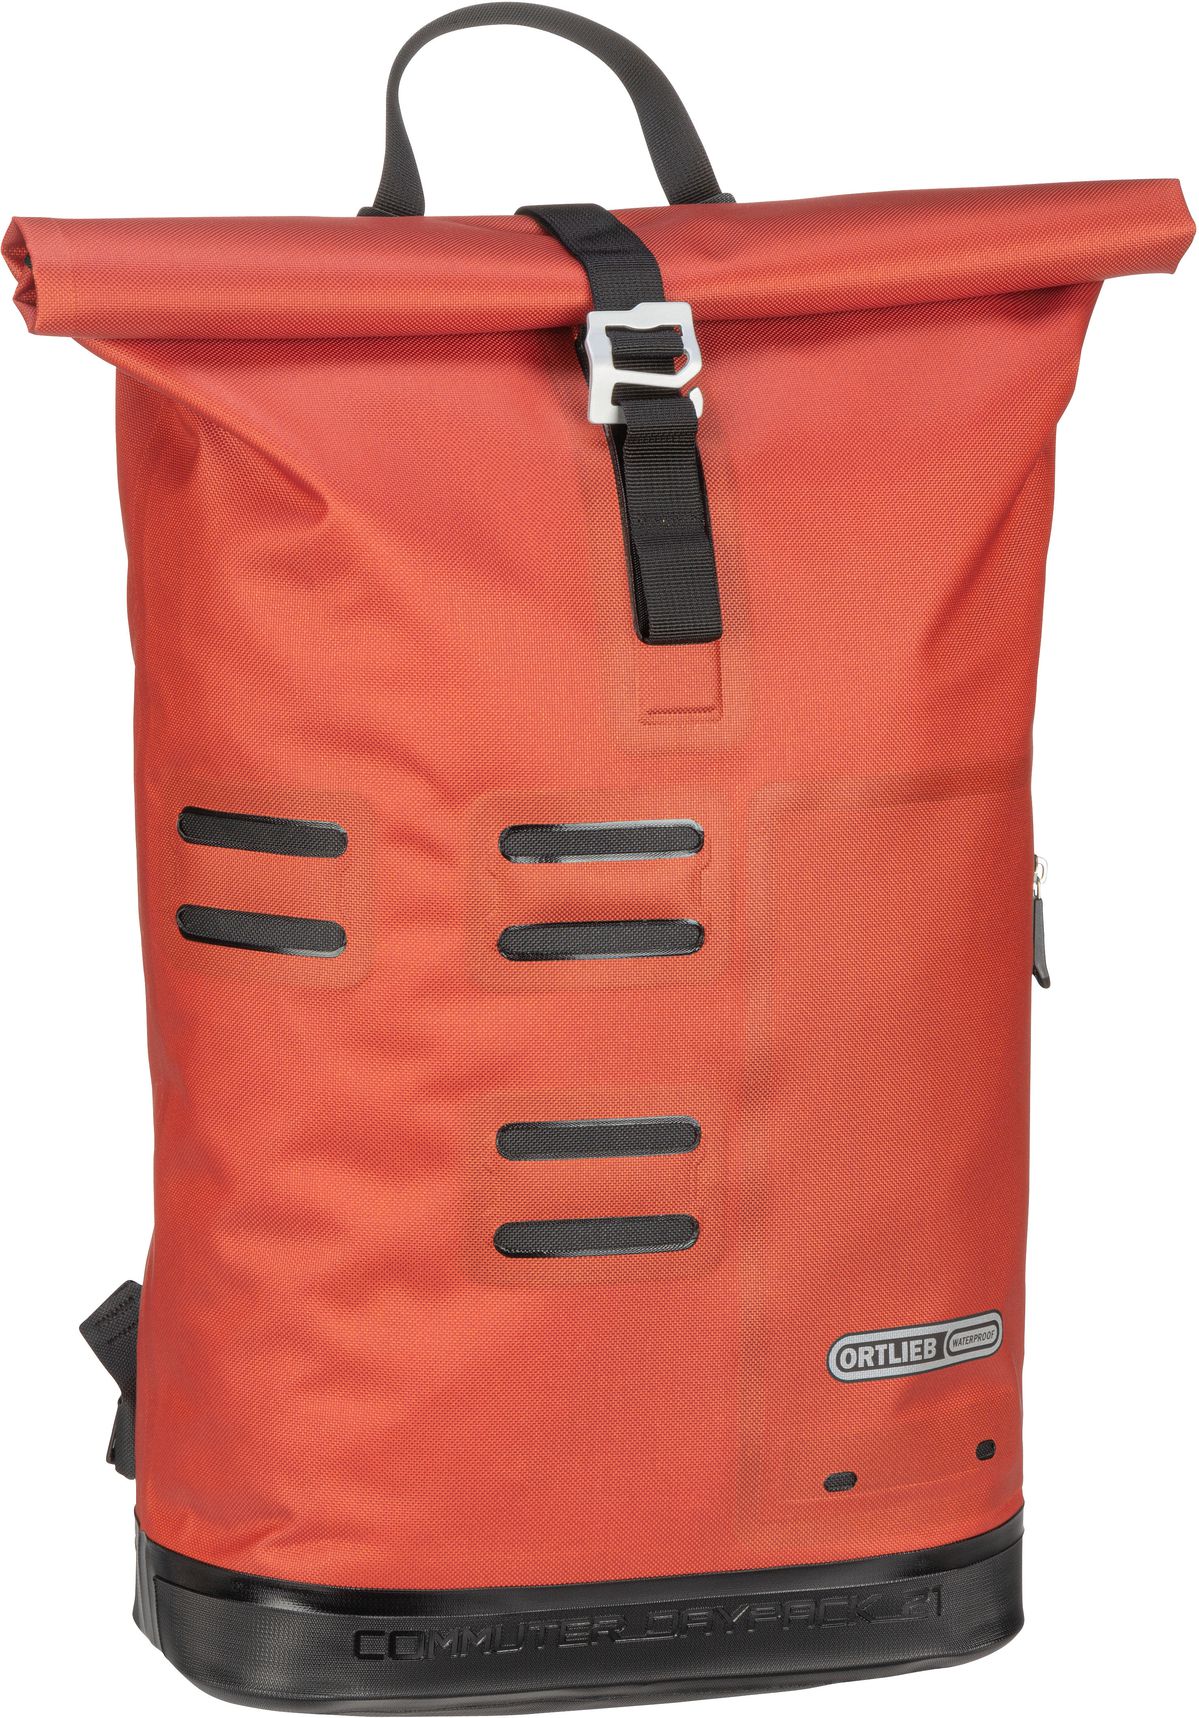 ORTLIEB Commuter-Daypack City 21L - Rooibos